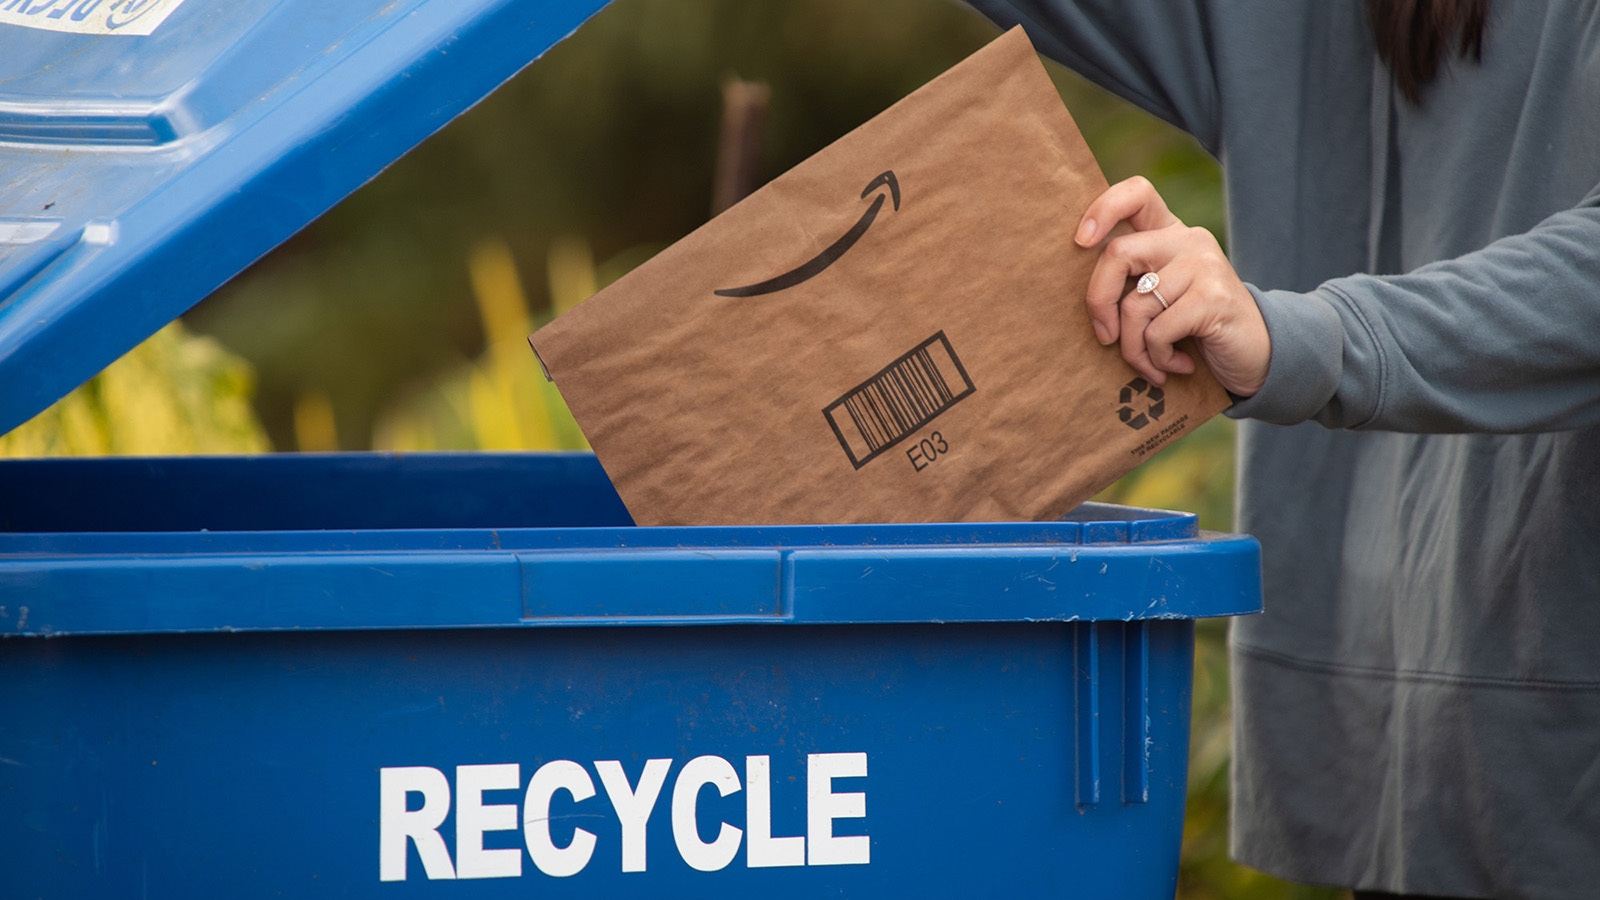 An image of a person putting an Amazon package in the recycle bin.